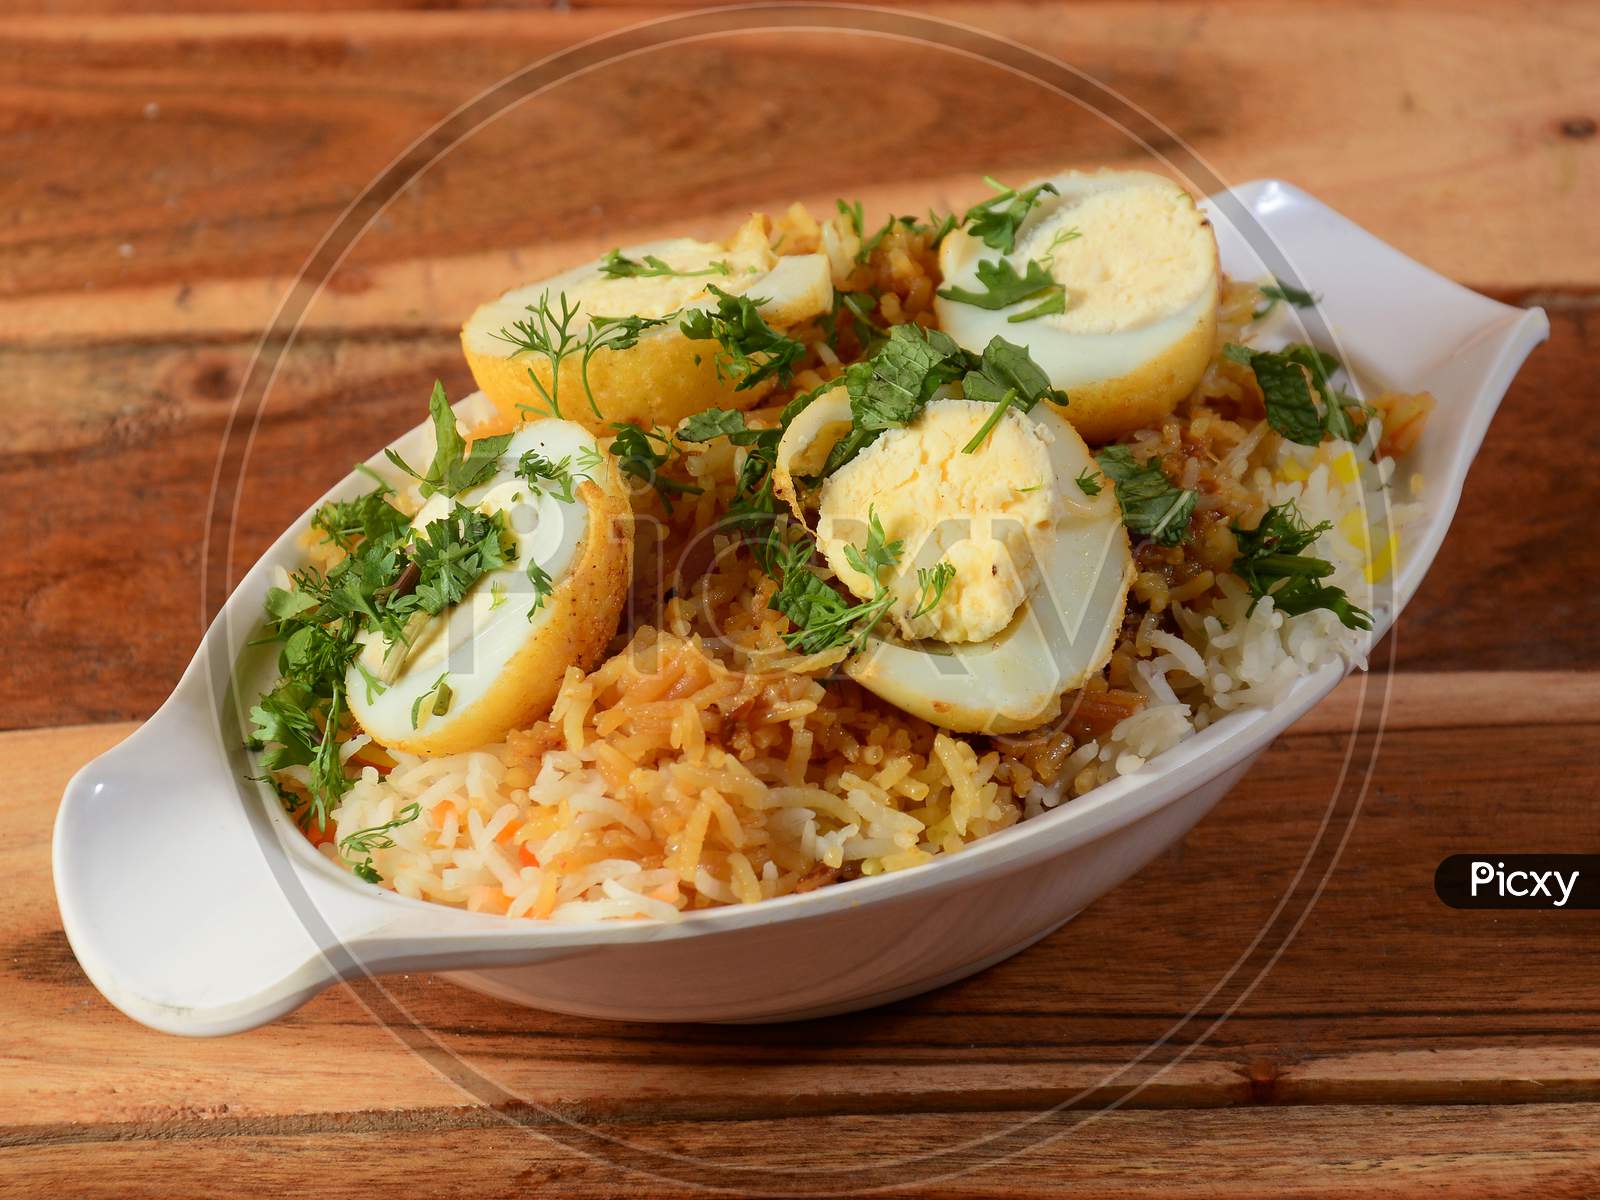 Egg Biryani - Basmati Rice Cooked With Masala And Spices And Served With Sliced Boiled Eggs, Selective Focus